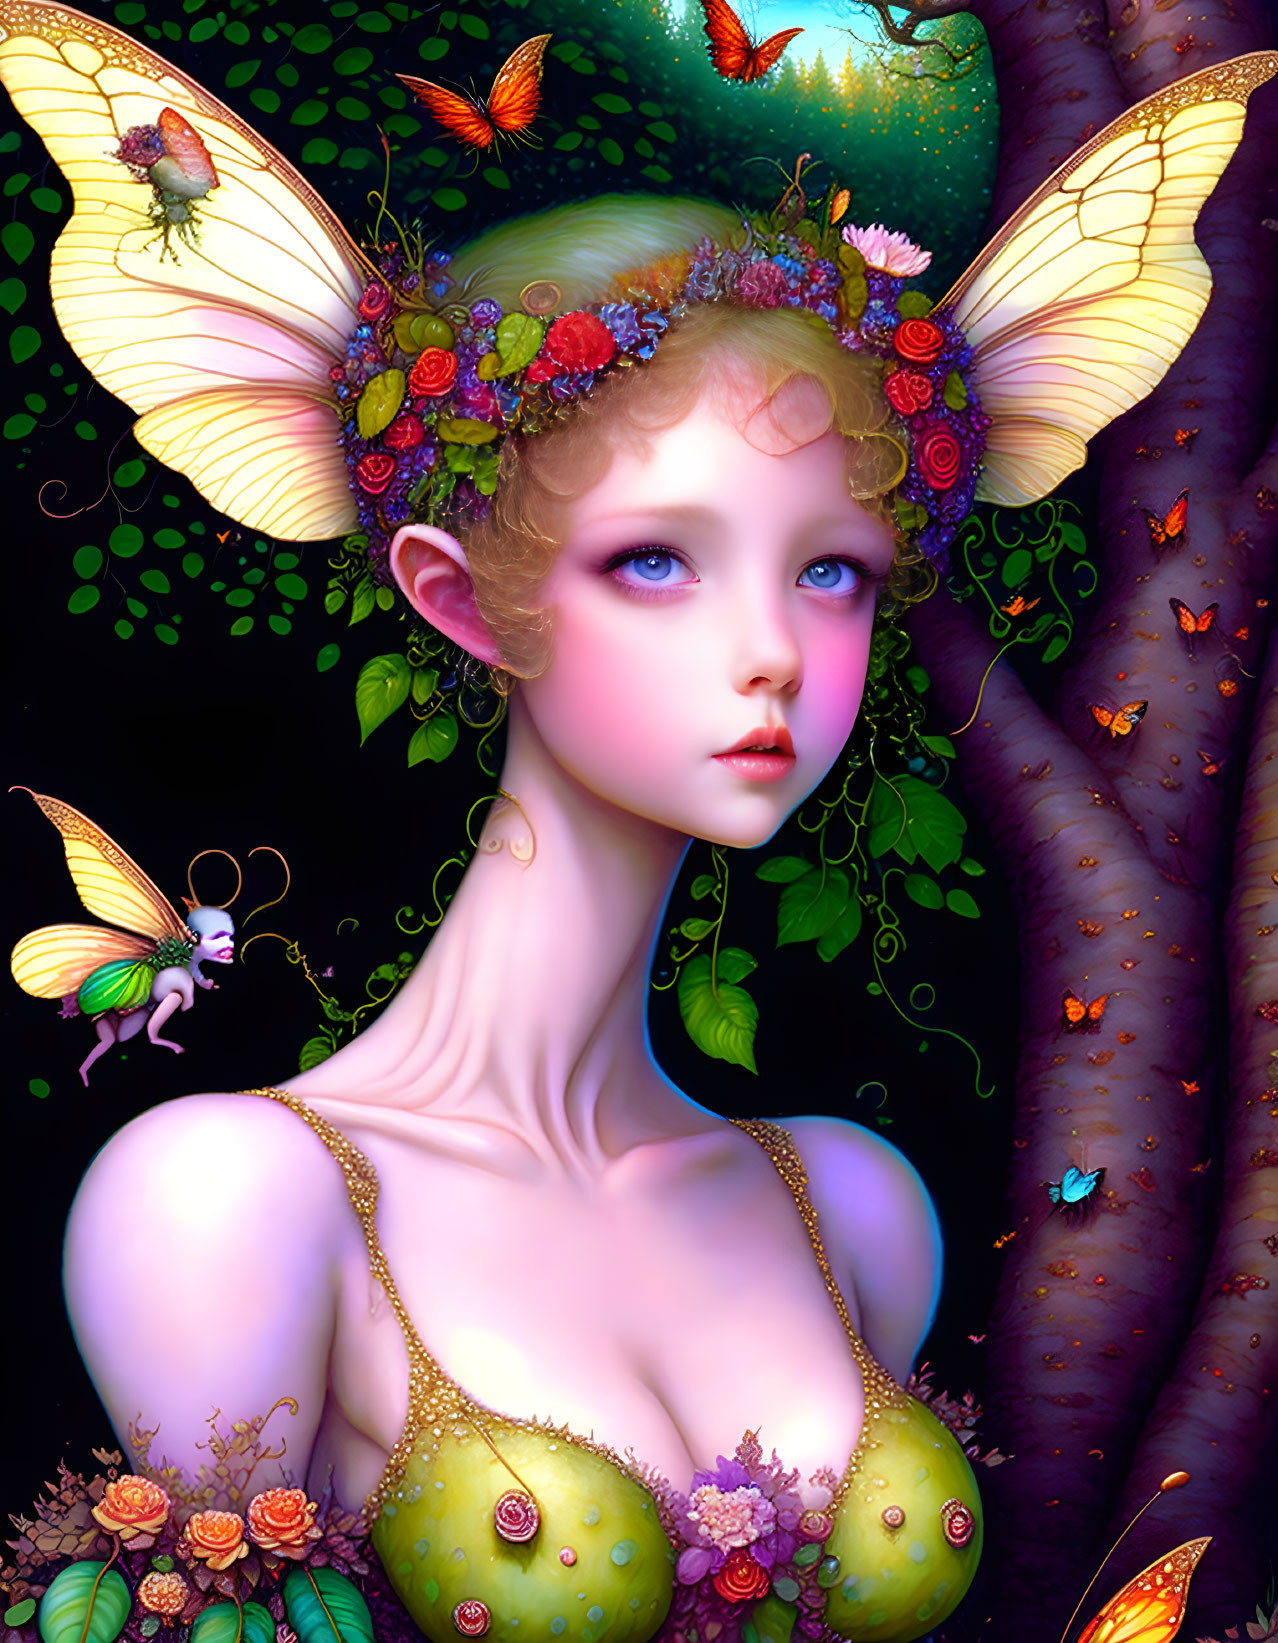 Illustration of a fairy with translucent wings in lush greenery